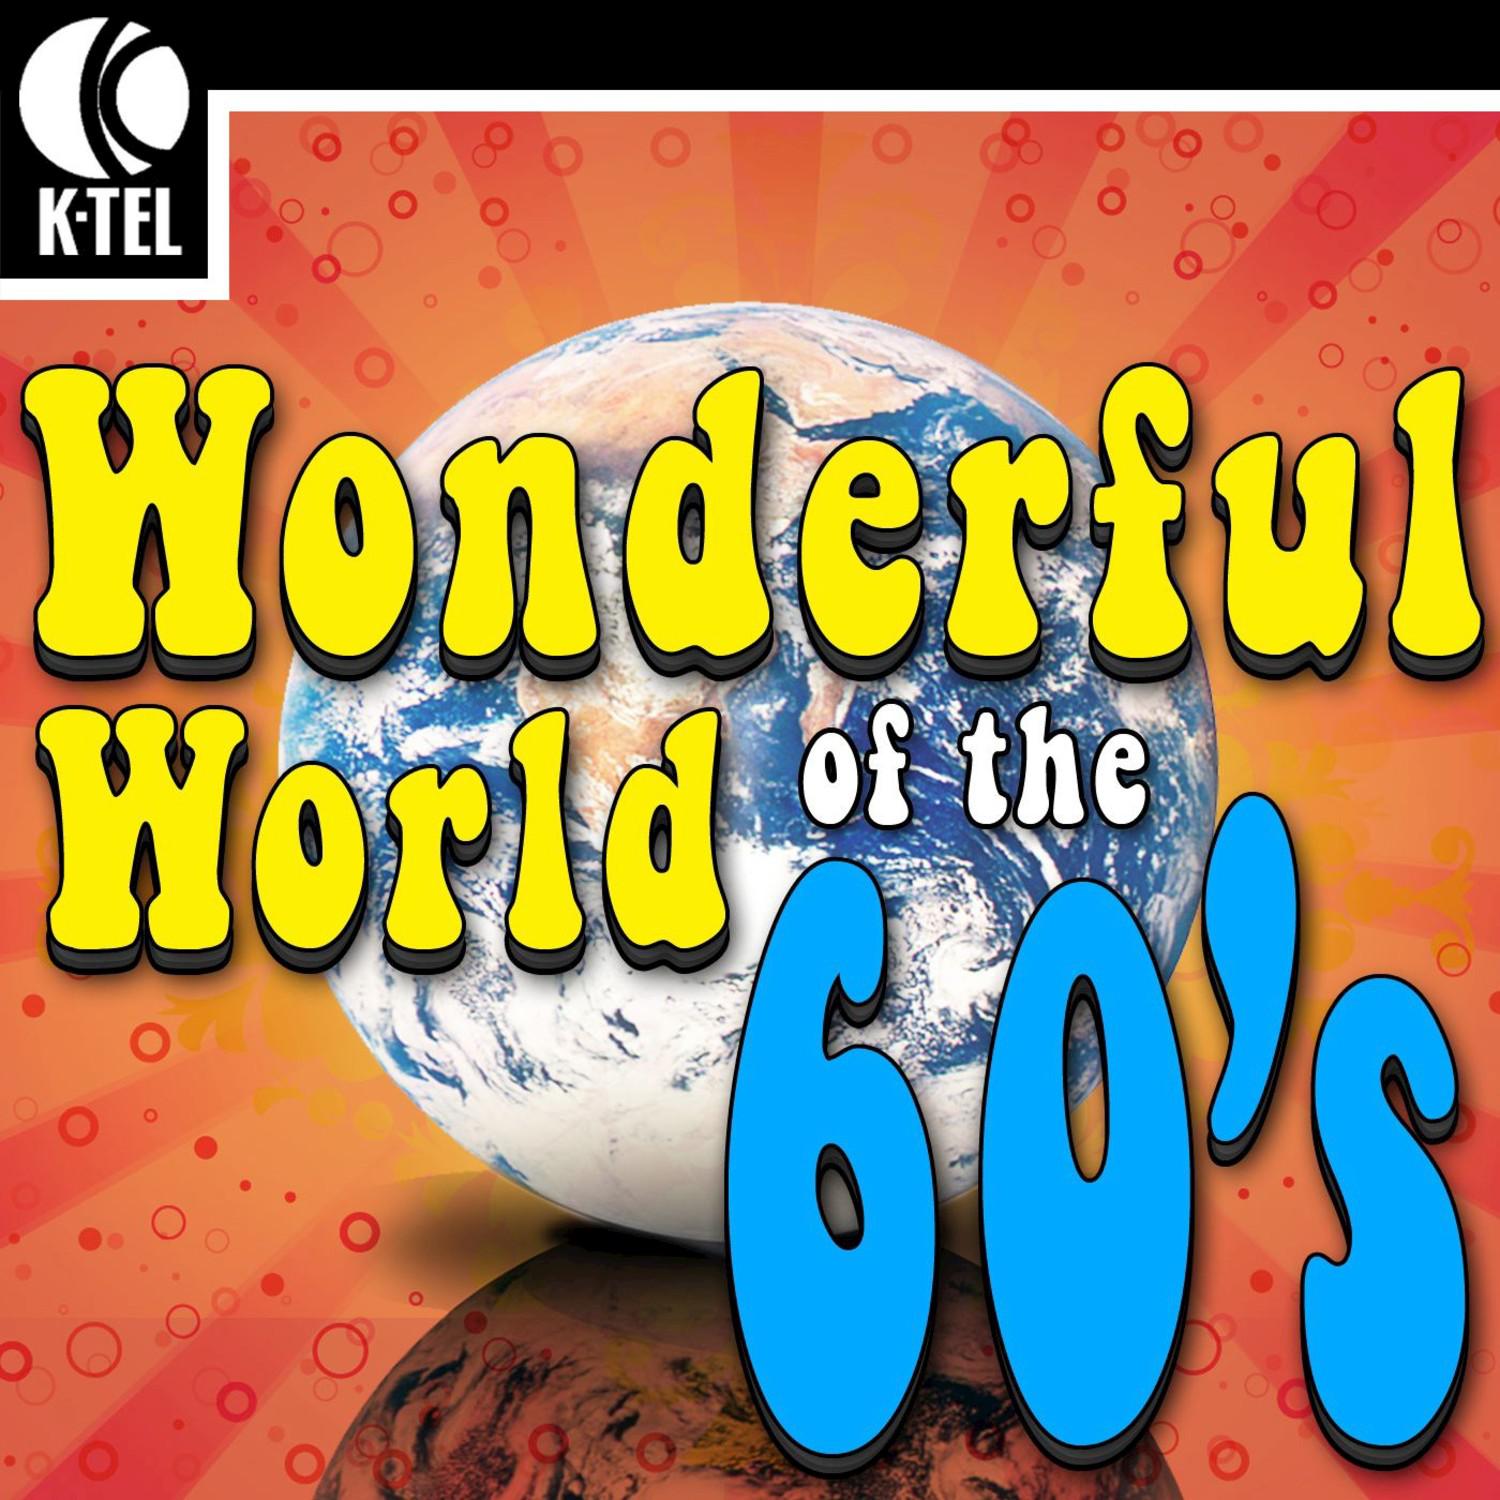 The Wonderful World of the 60's - 100 Hit Songs